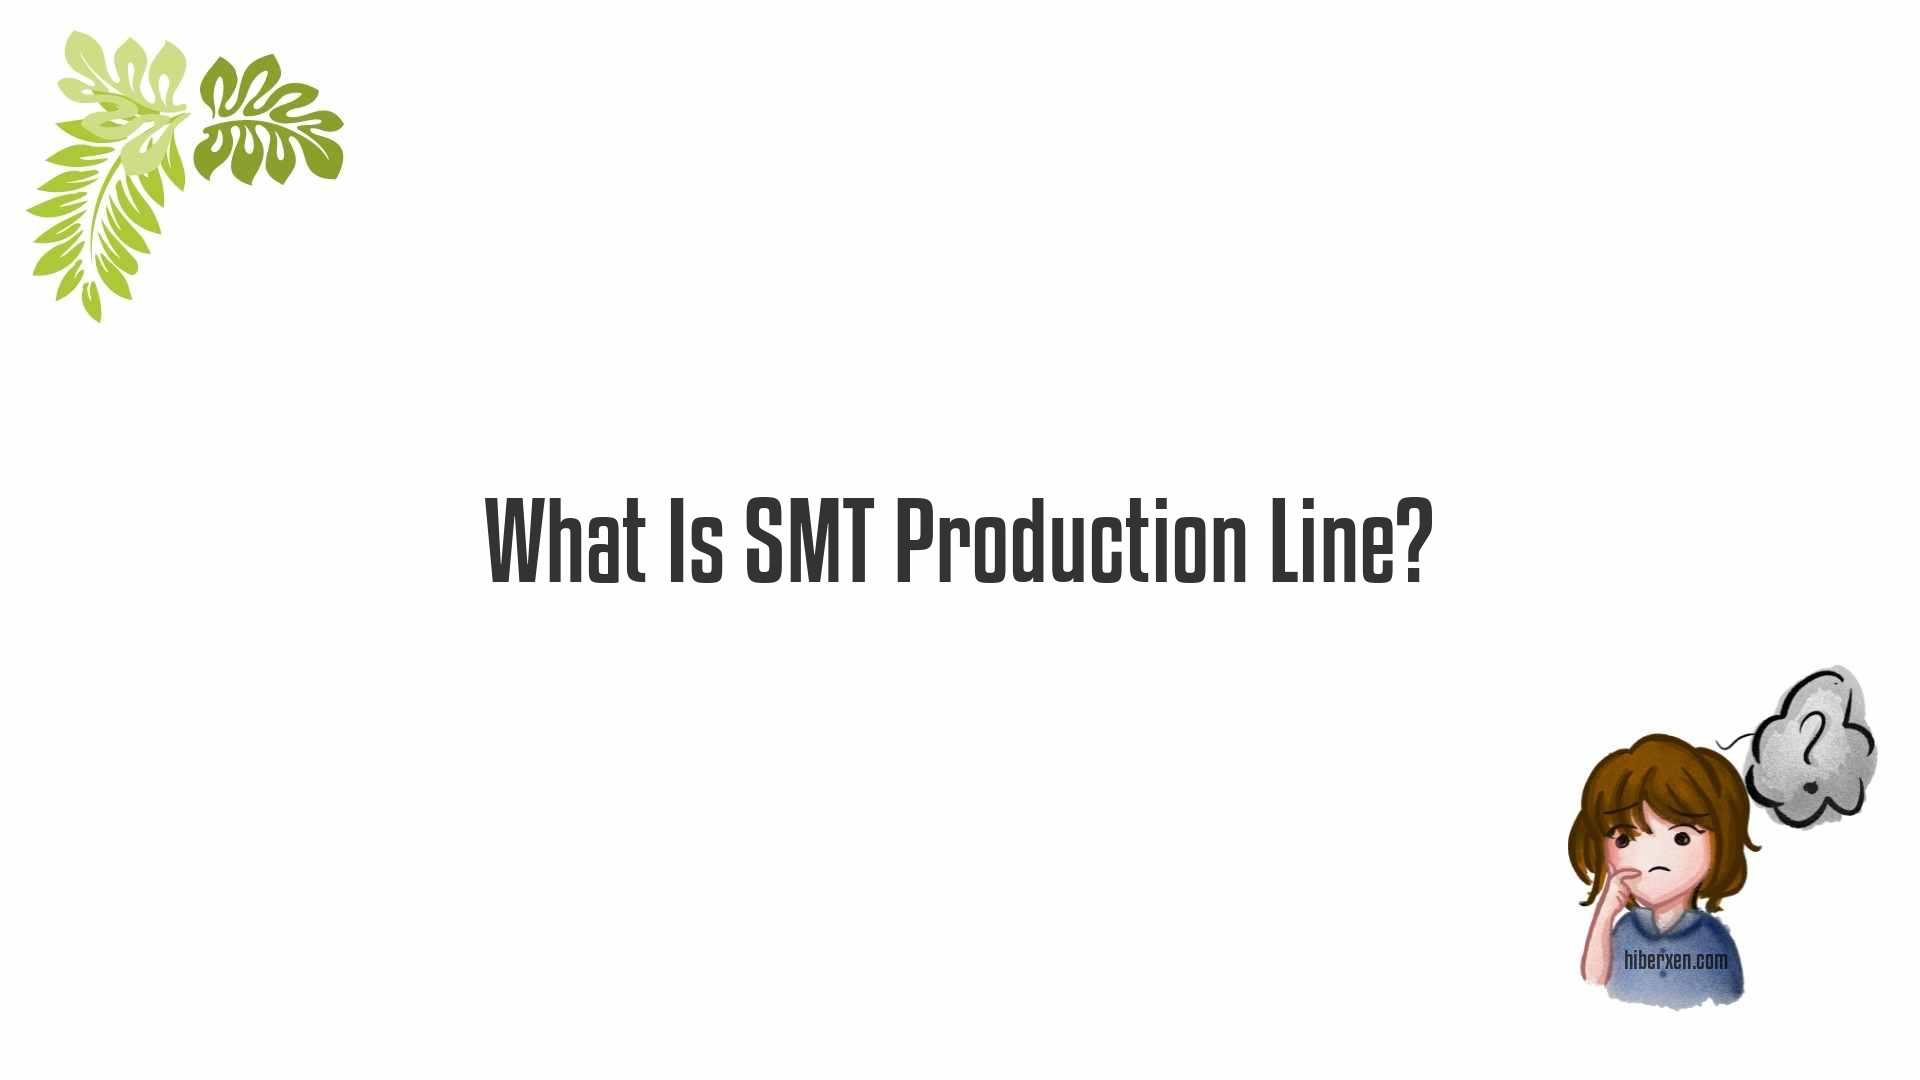 What Is SMT Production Line?